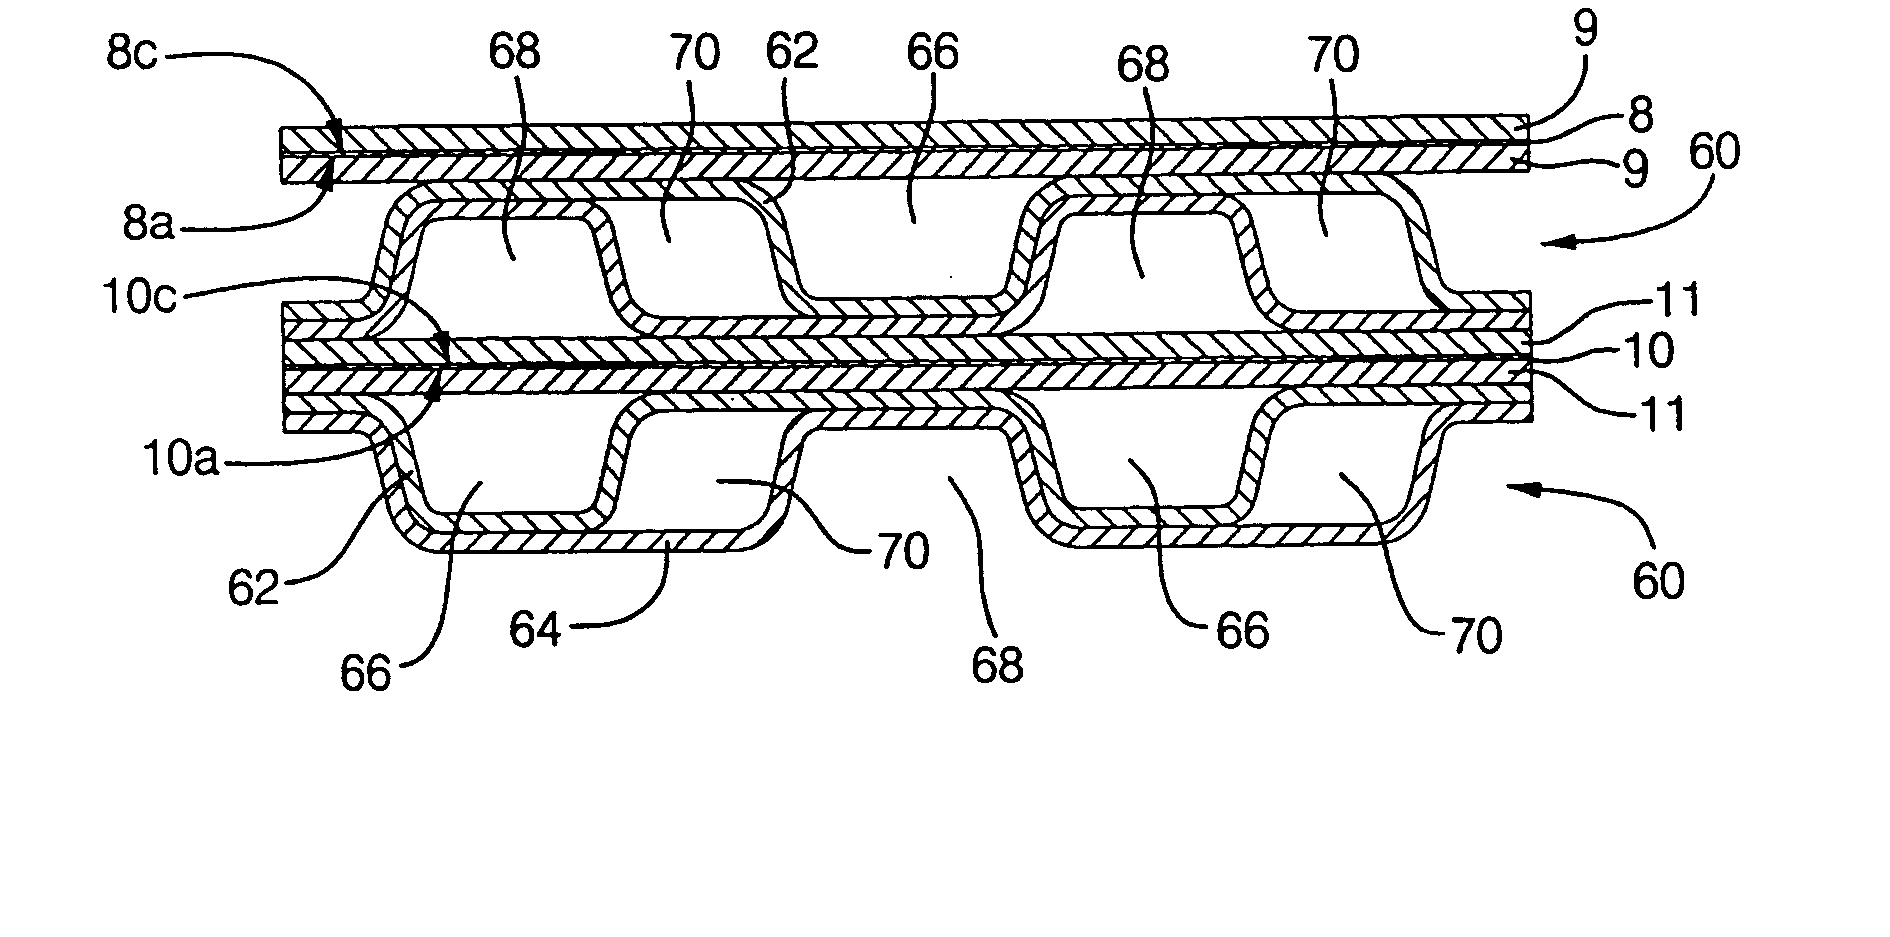 Nested bipolar plate for fuel cell and method